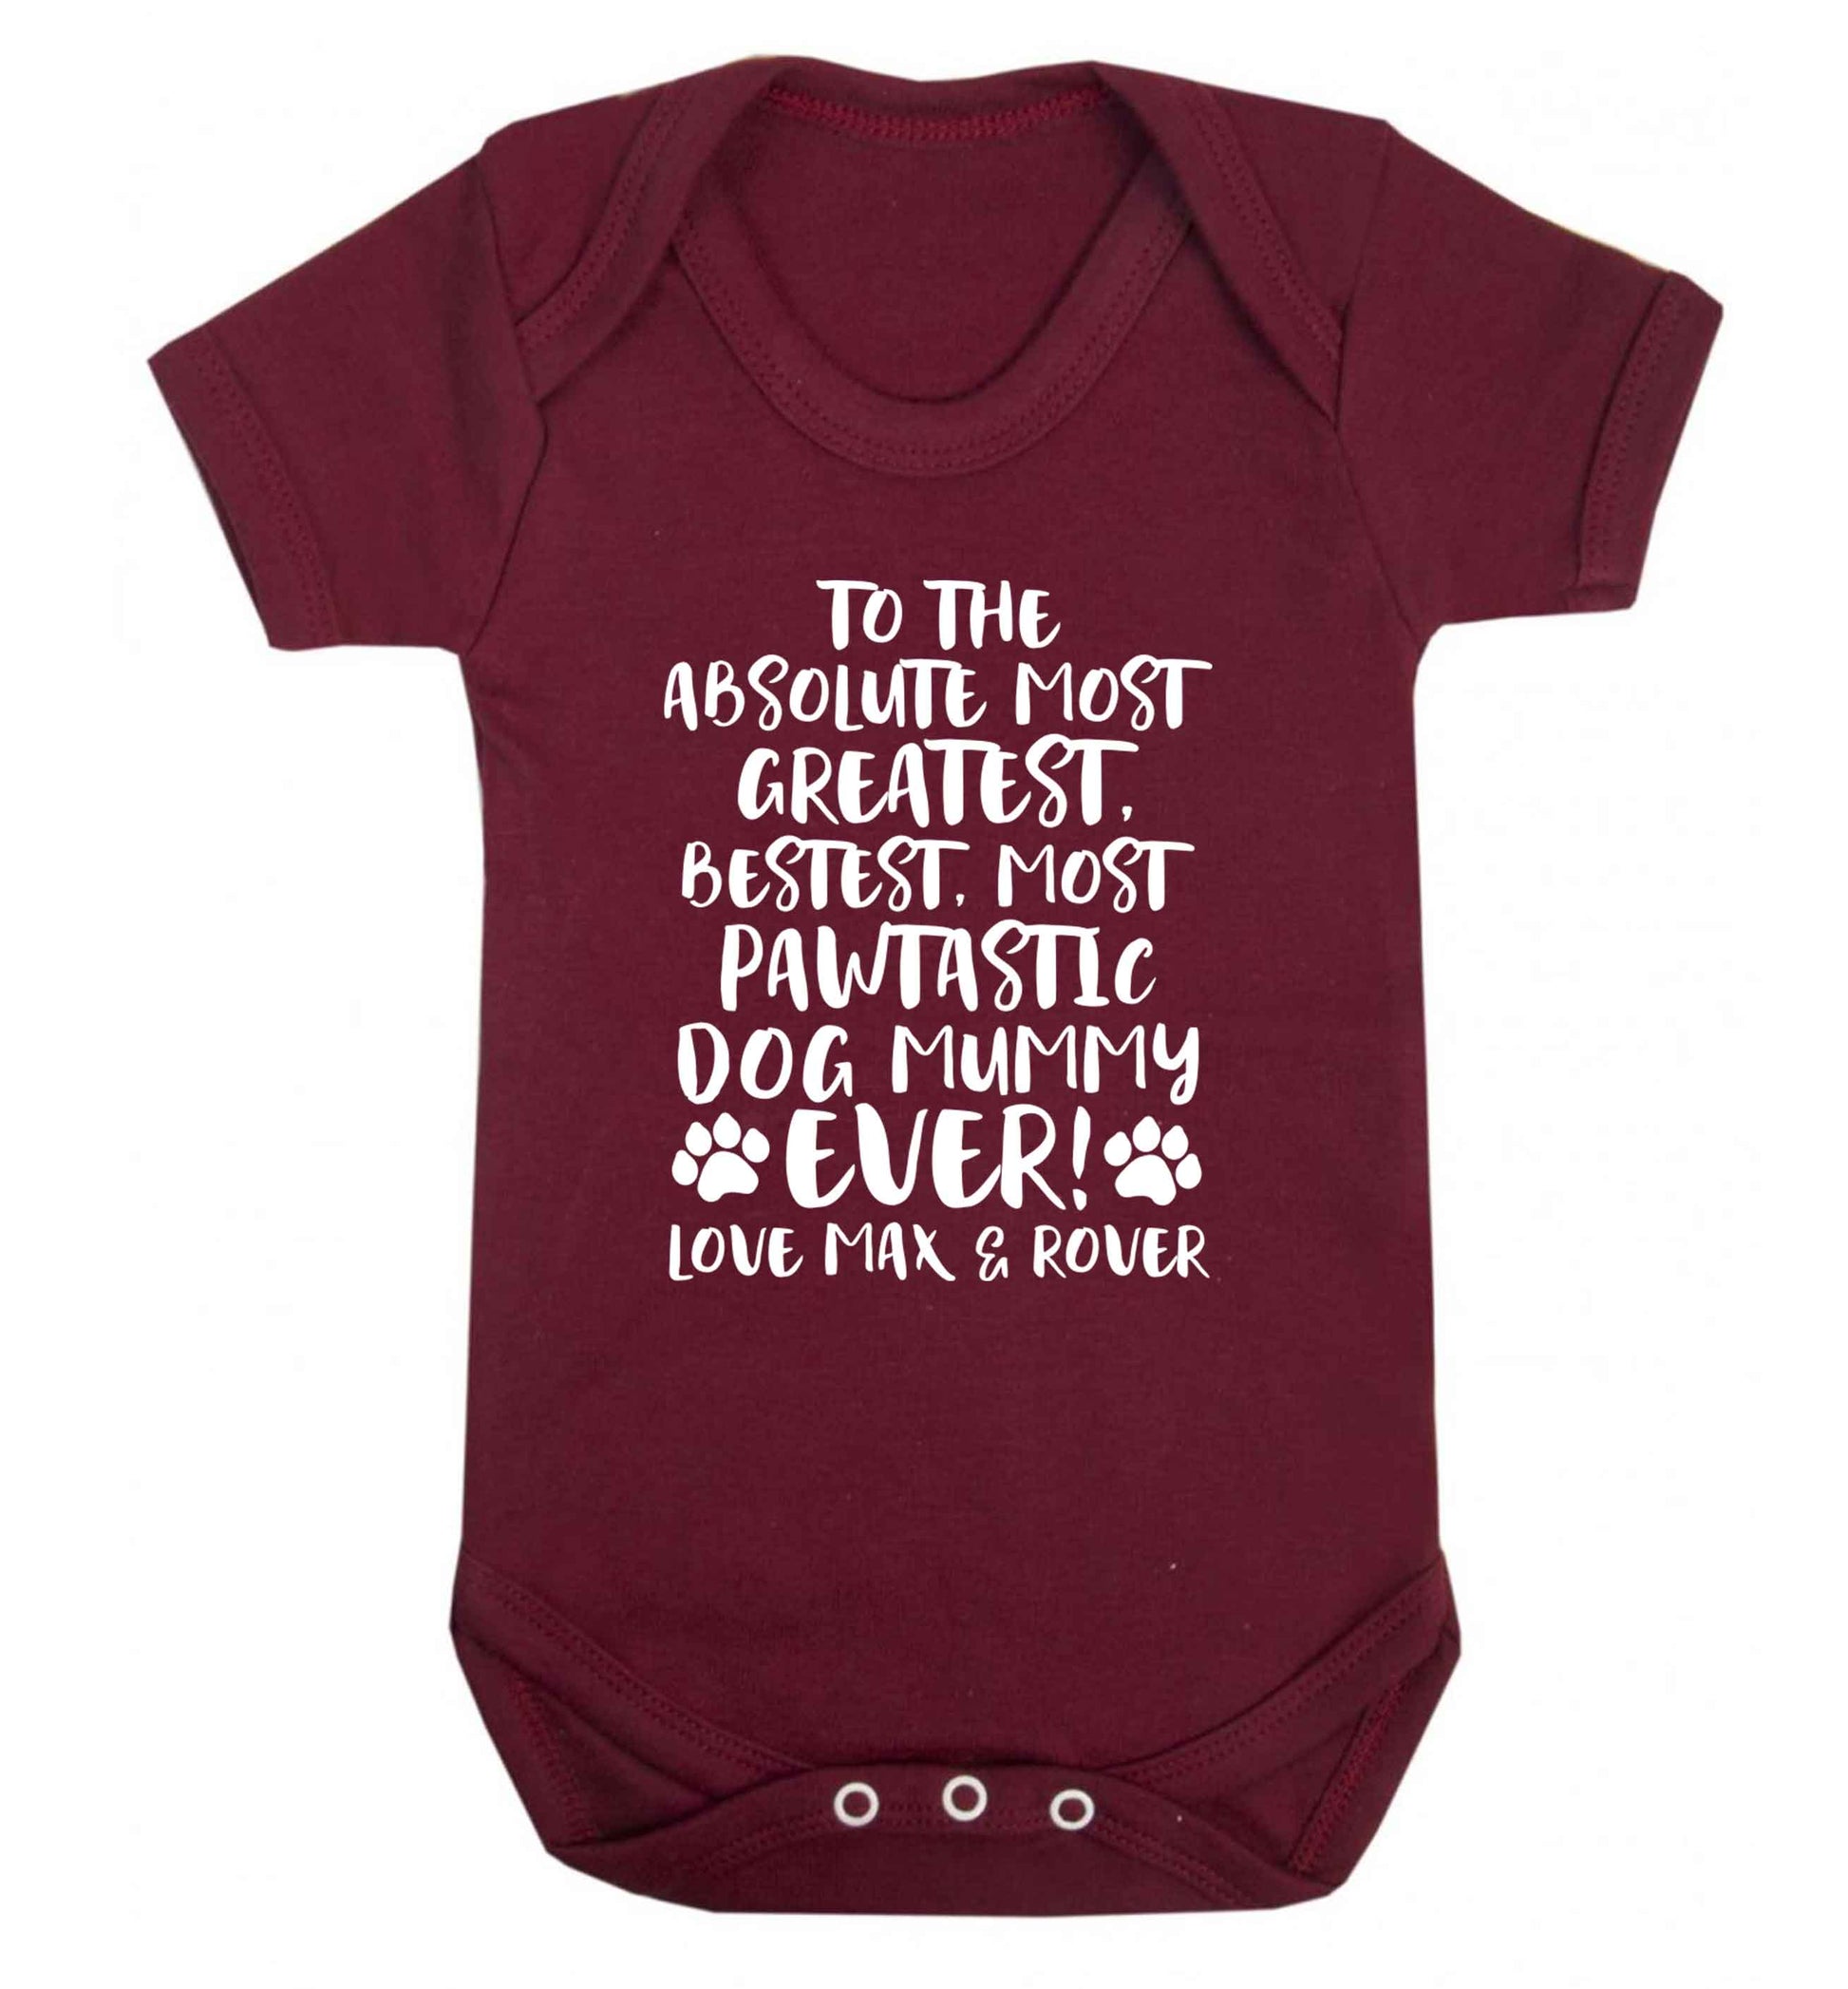 Personalsied to the most pawtastic dog mummy ever Baby Vest maroon 18-24 months